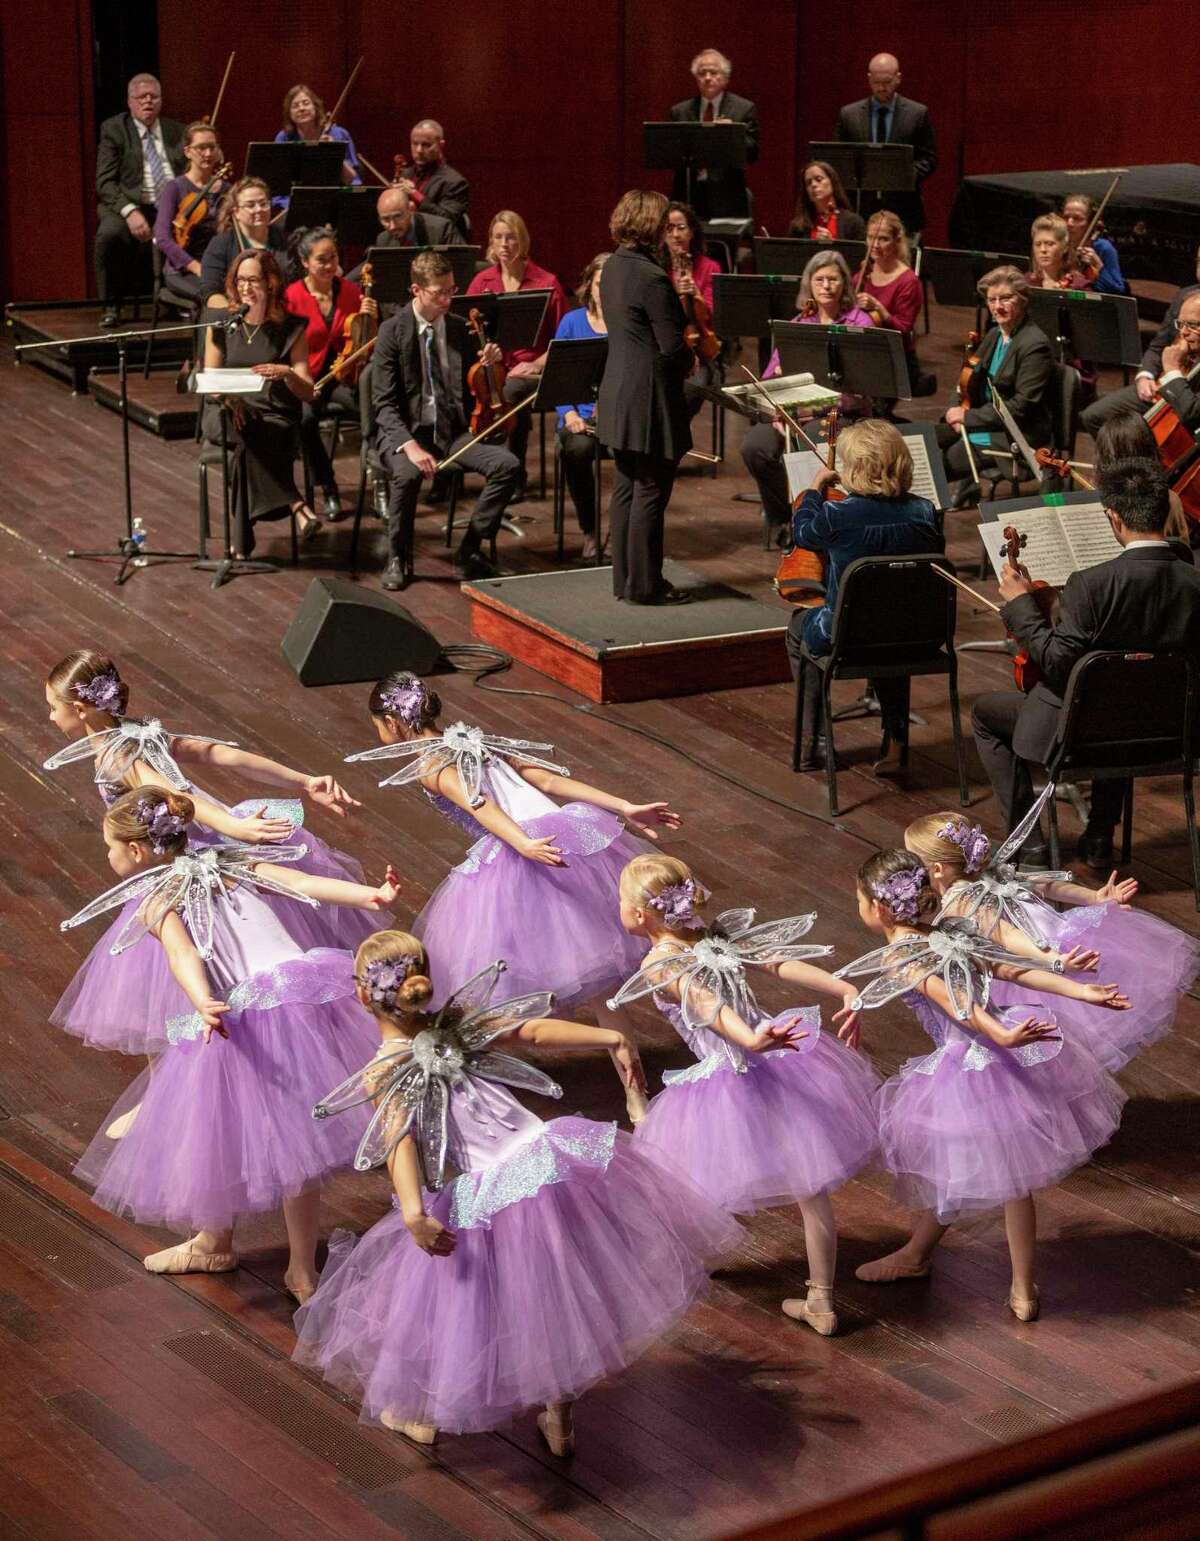 The San Antonio Symphony teamed up with the Children’s Ballet of San Antonio and other arts organizations to present an adaptation of “A Midsummer Night’s Dream” for school groups in December. The performance was part of QWILL, a language arts and writing program.